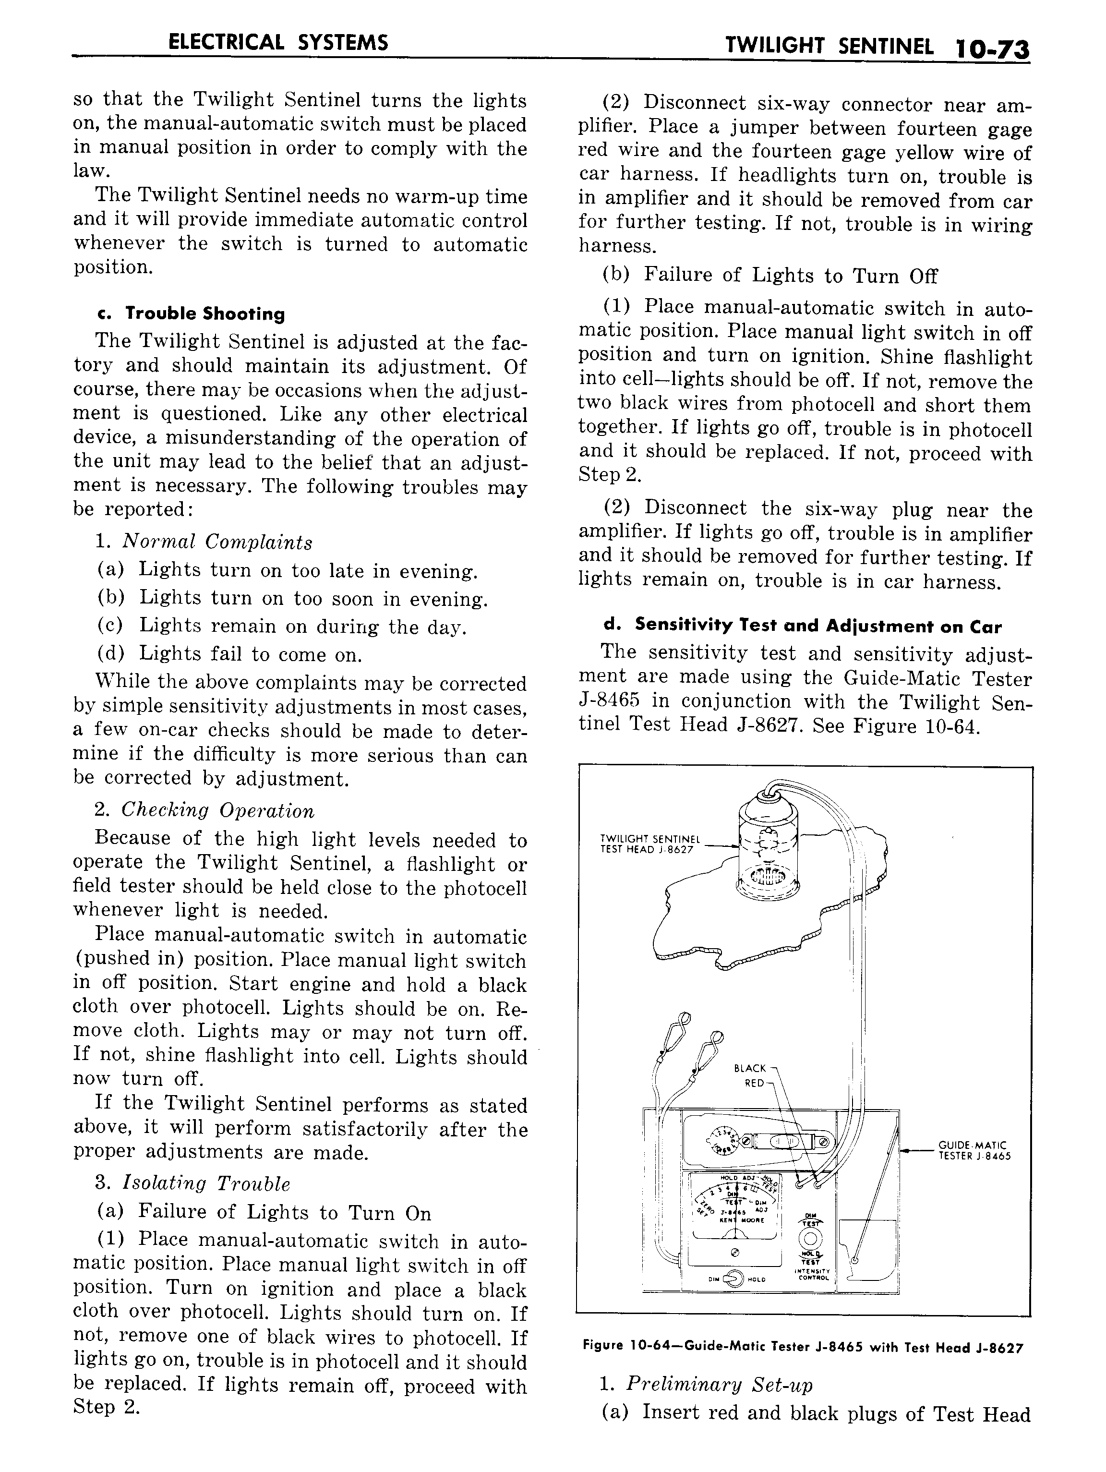 n_11 1960 Buick Shop Manual - Electrical Systems-073-073.jpg